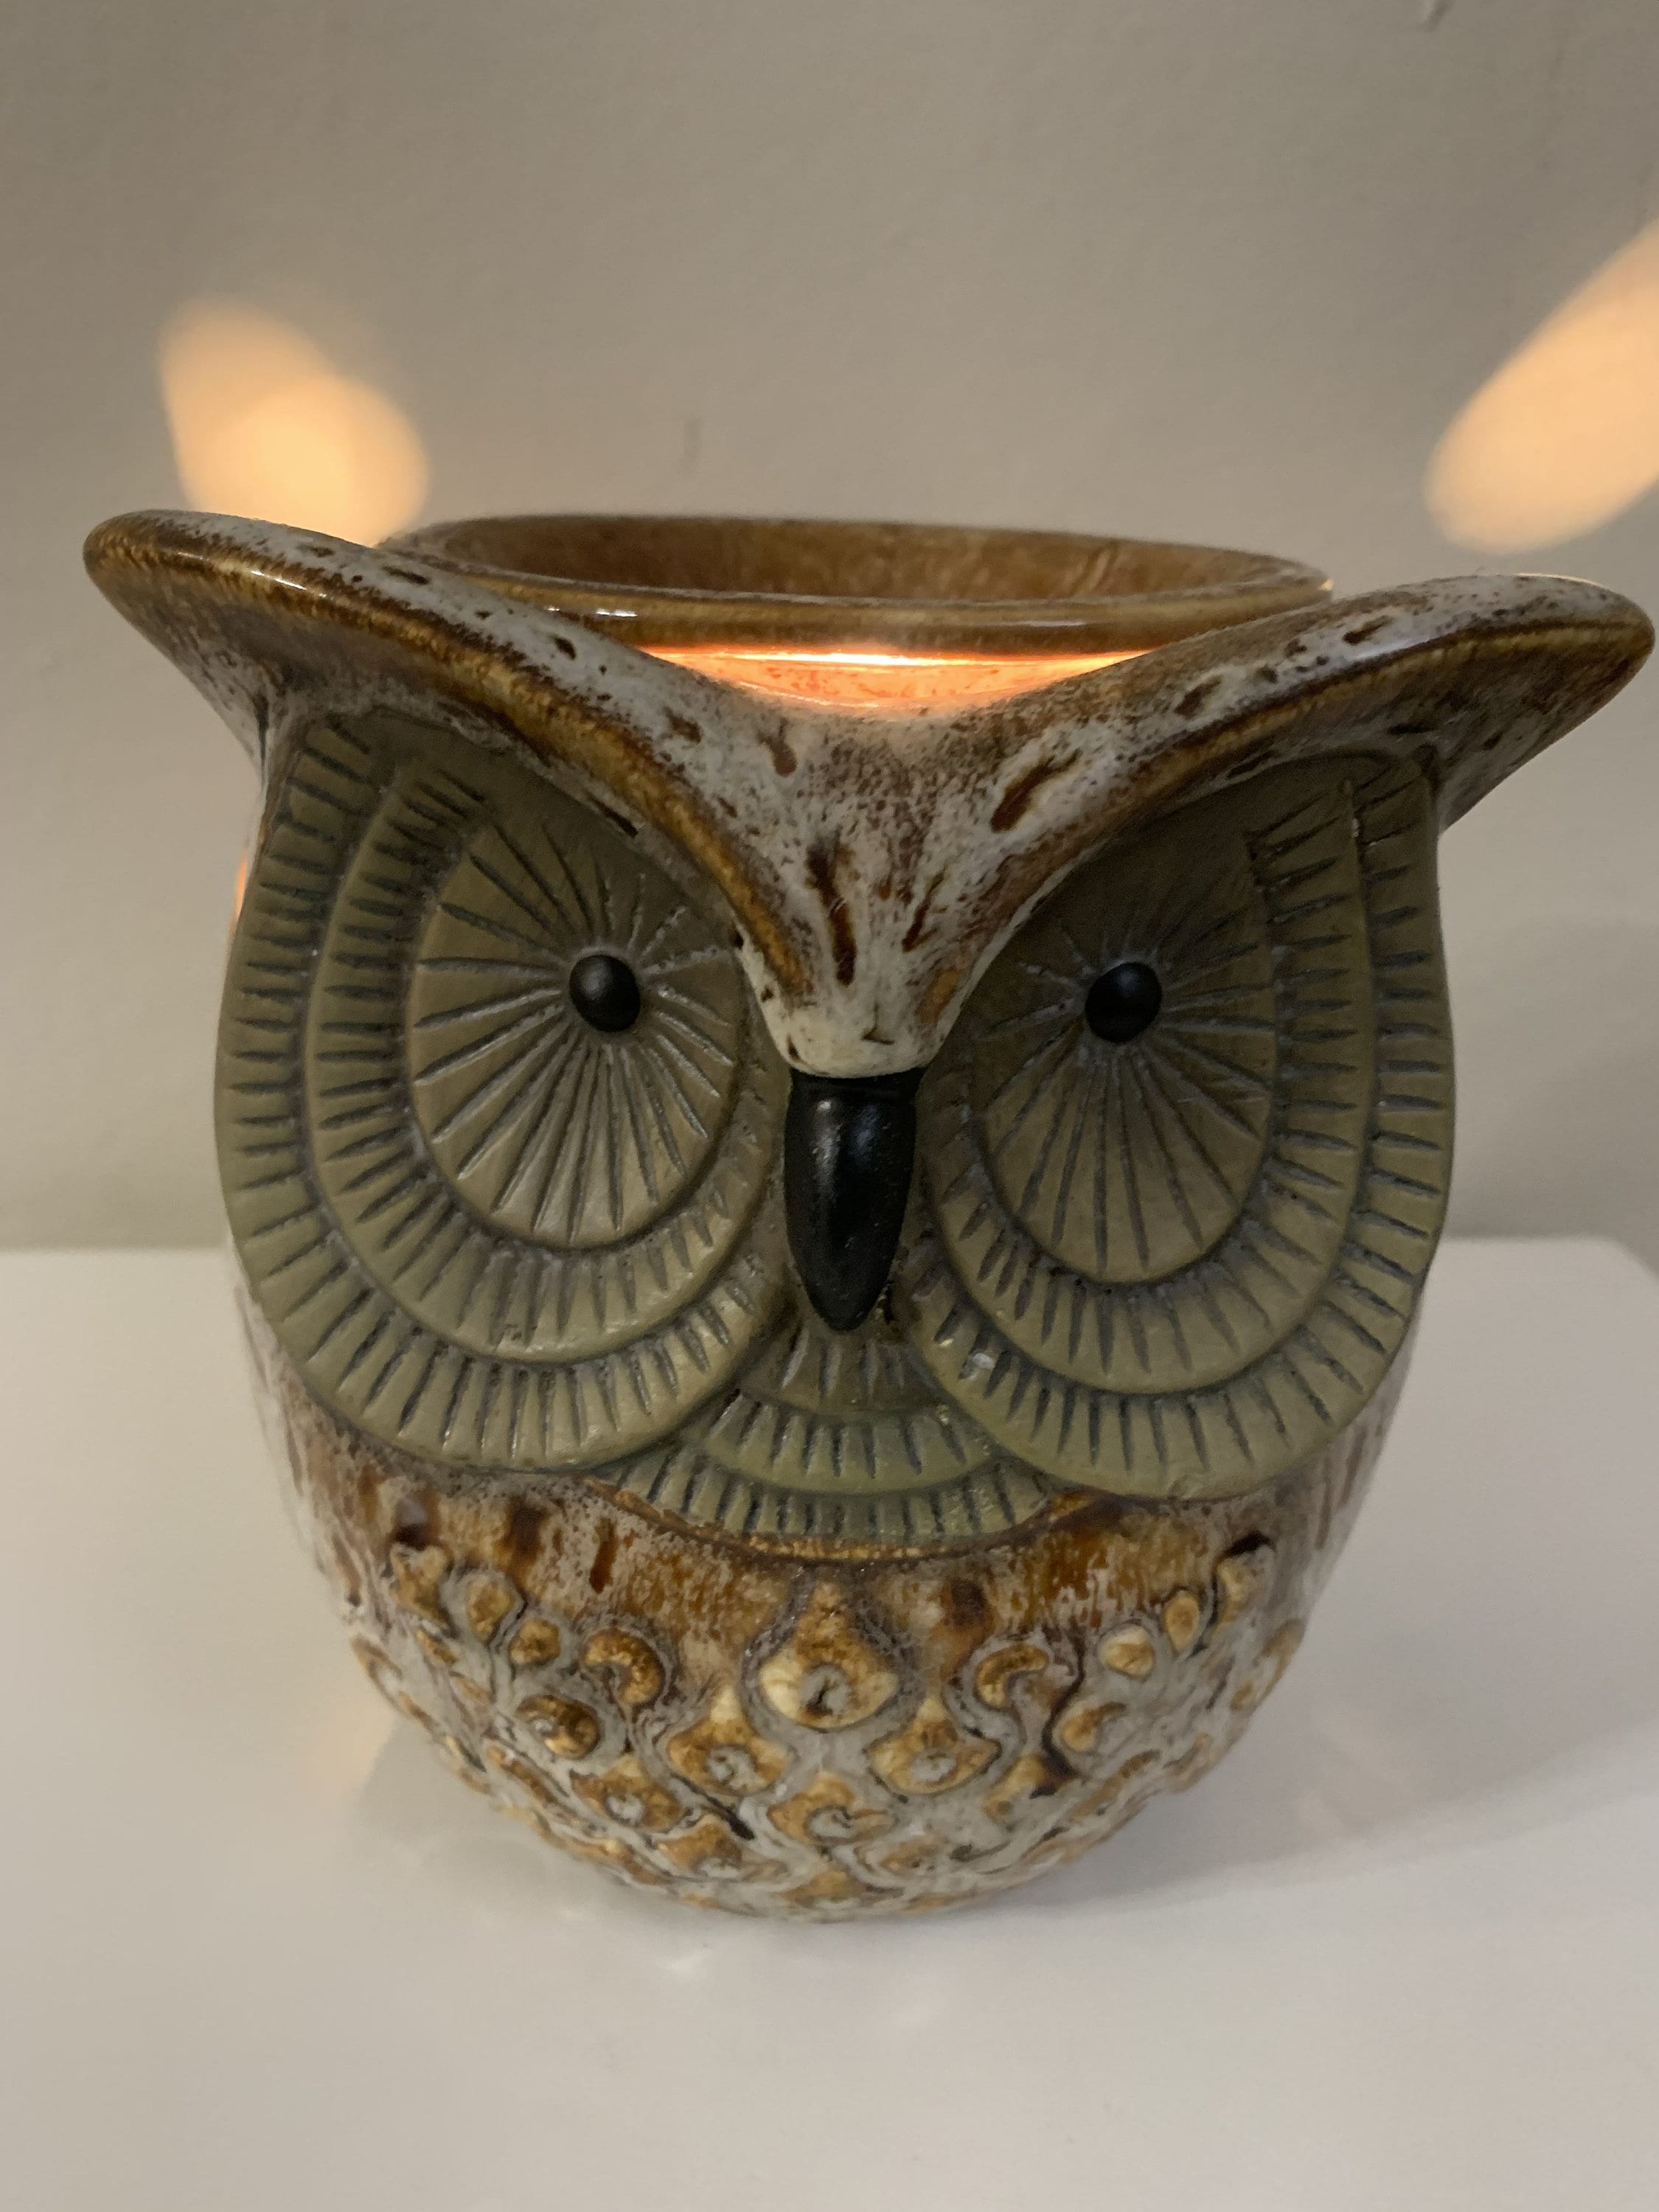 New in box harry potter scentsy warmer owl